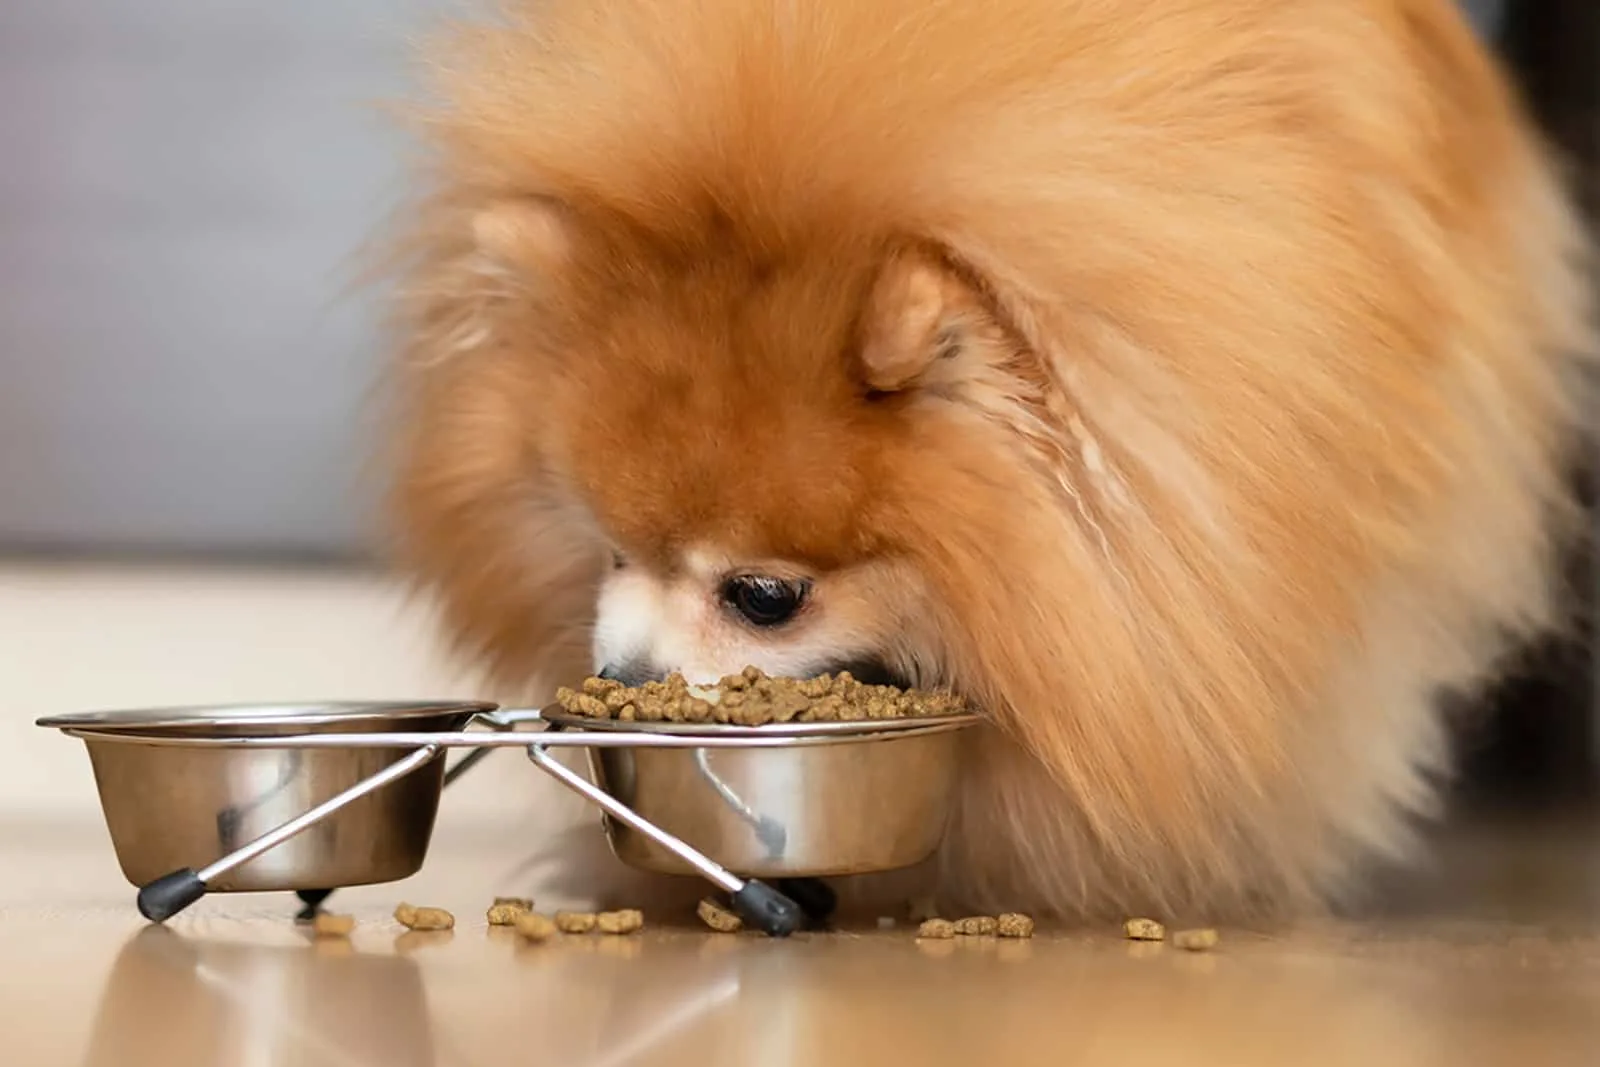 pomeranian spitz dog eating dry food from a metal bowl